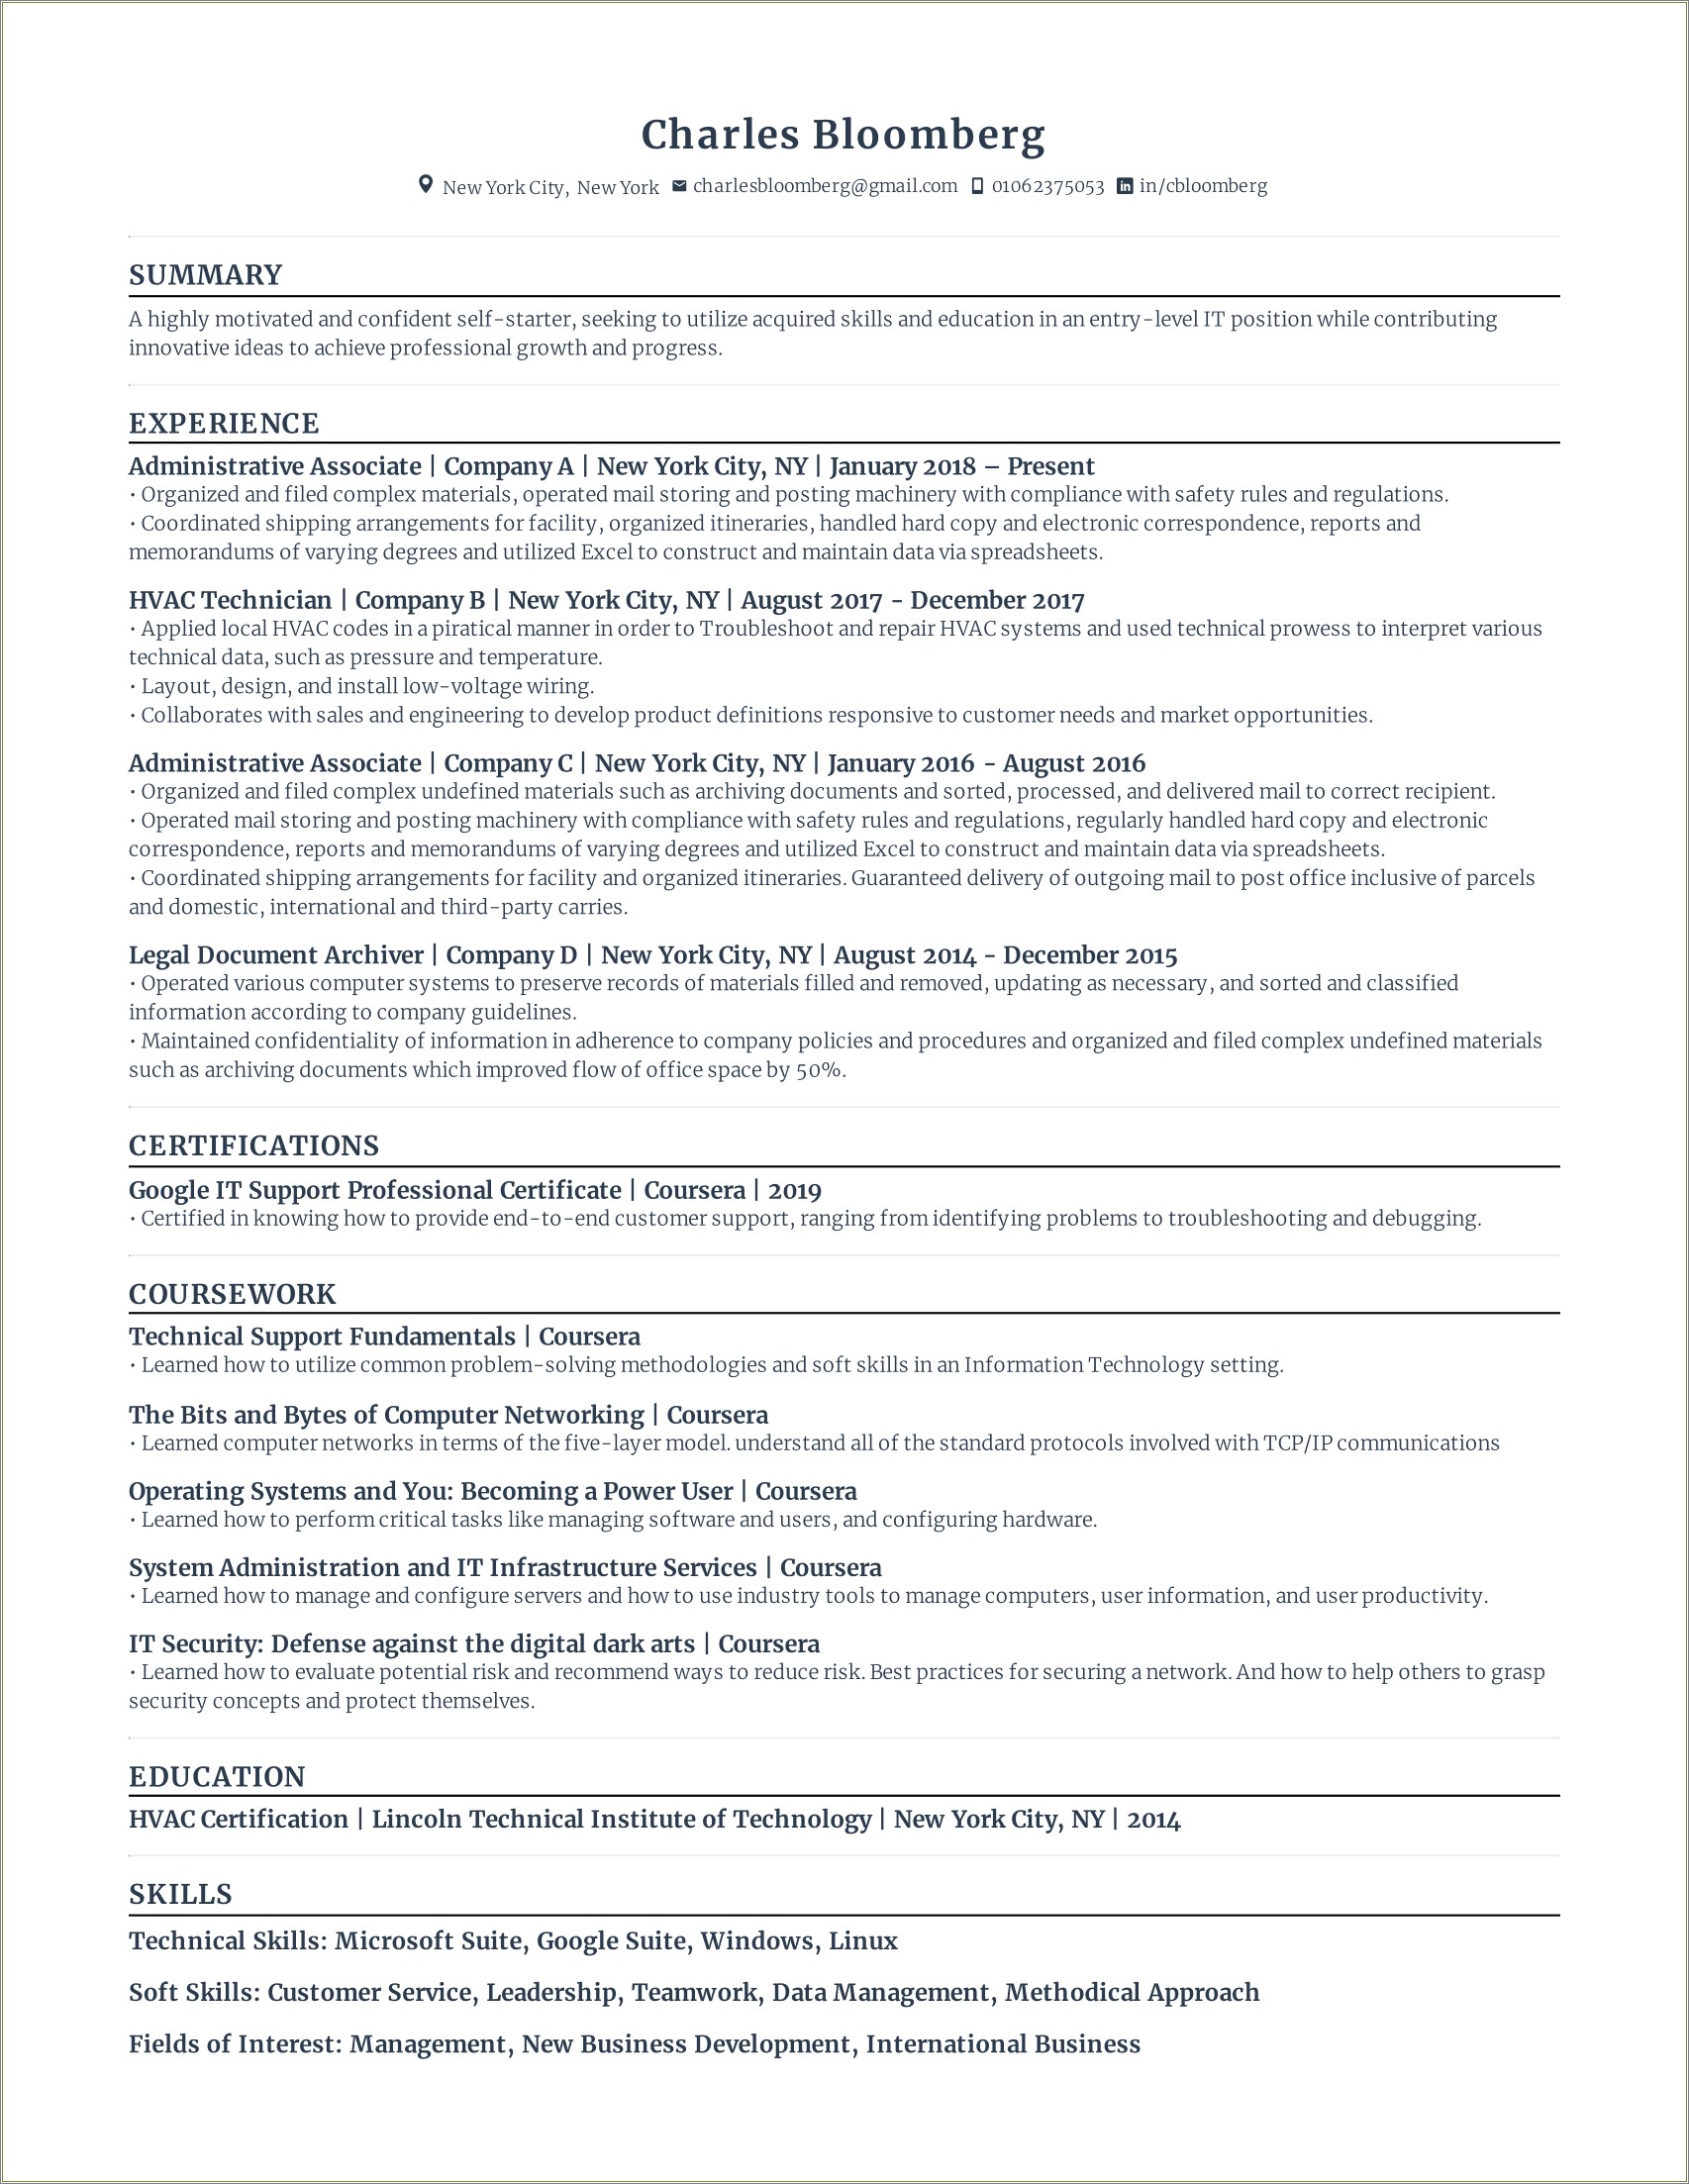 Sample Resume For Administrative Assistant In Corporate Business